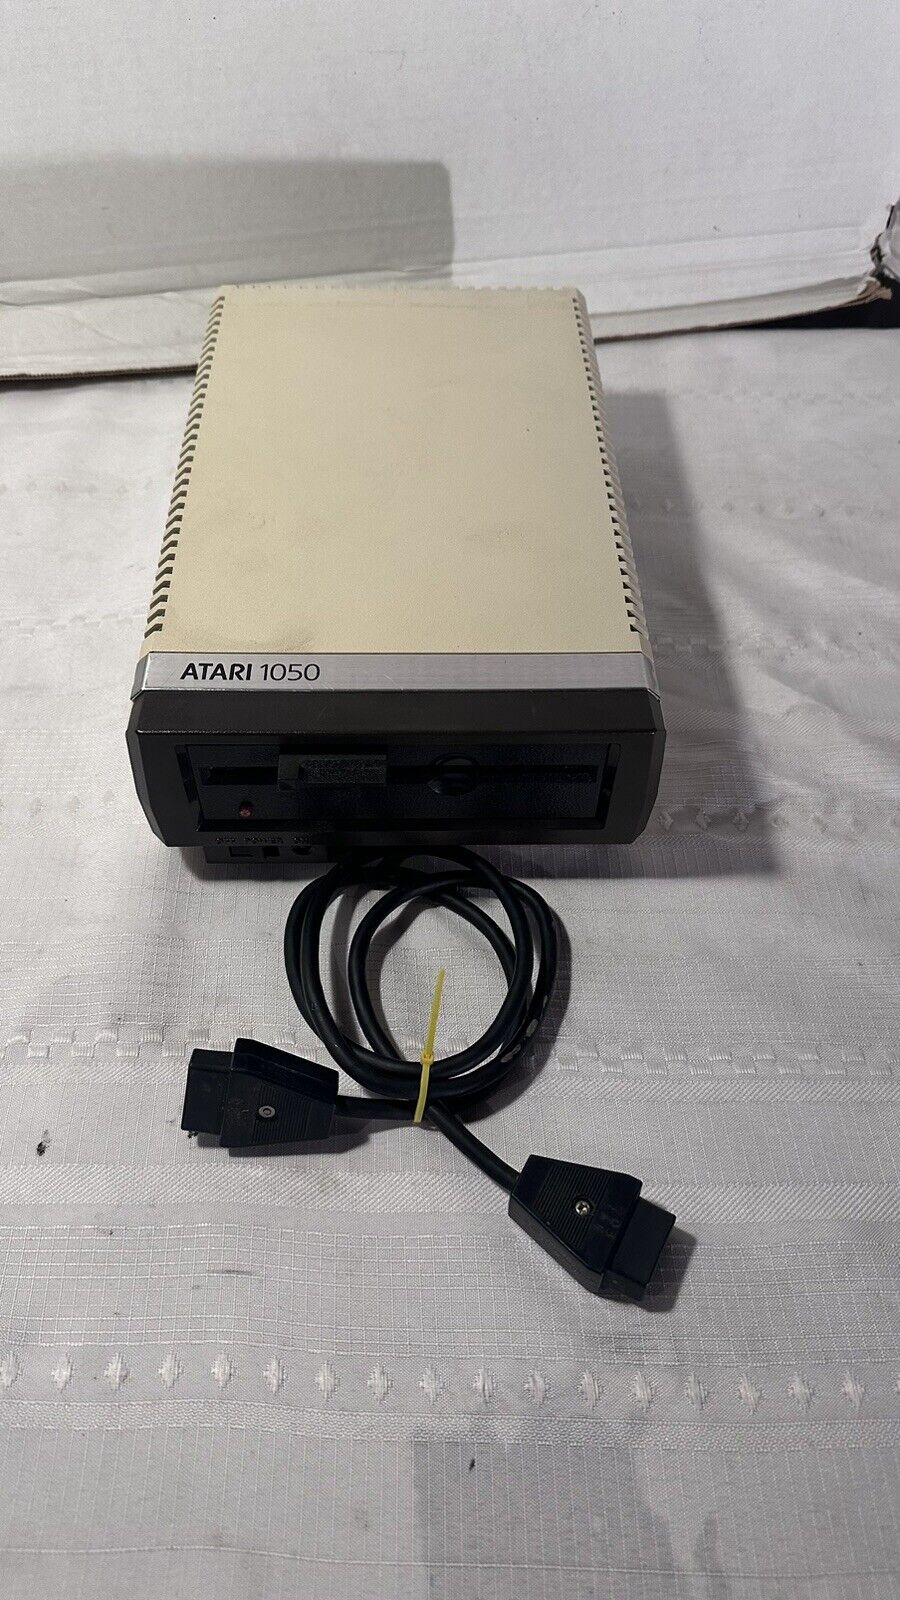 REFURBISHED Atari 1050 5.25 1/4 Disk Drive With SIO Cable READ